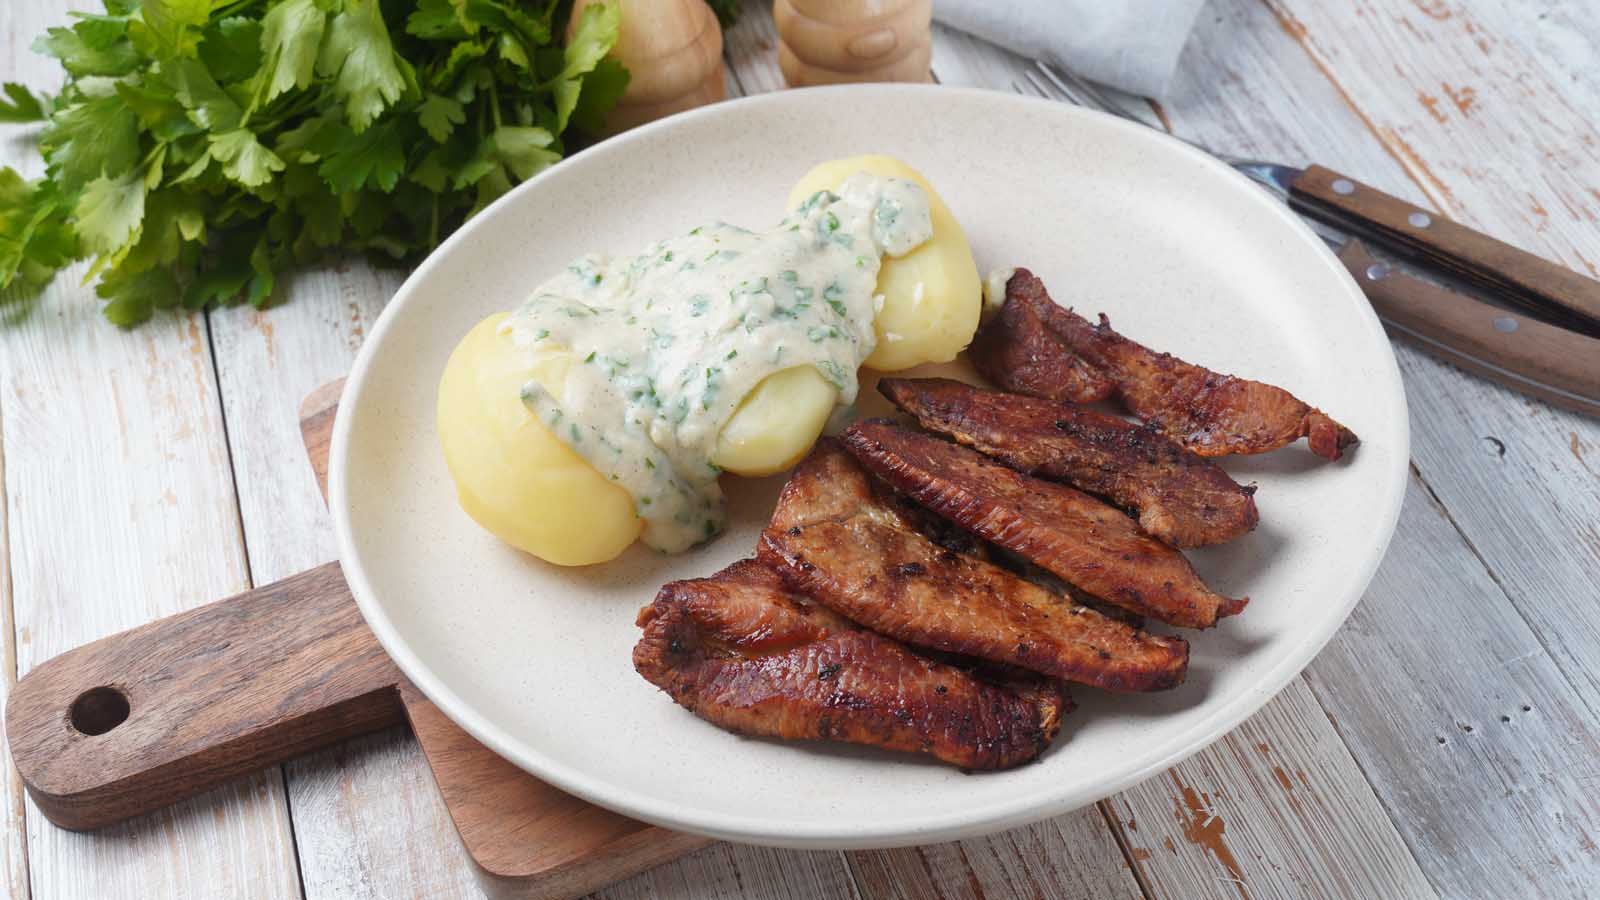 Danidh Food National Dish Stegt Flæsk Med Persillesovs - Fried Pork Belly With Potatoes and Parsley Sauce